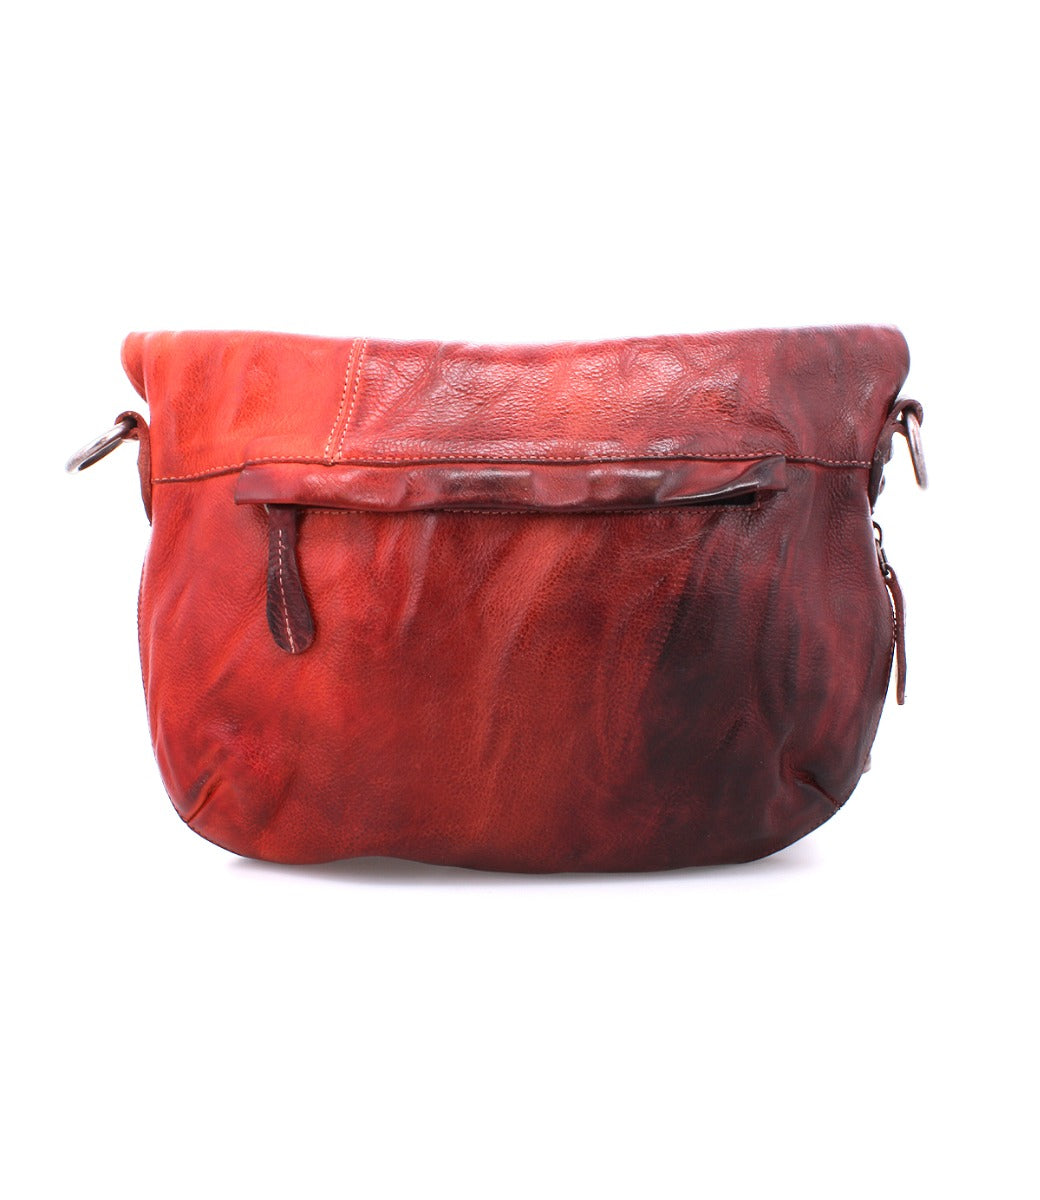 A red leather Tahiti bag with a zipper by Bed Stu.